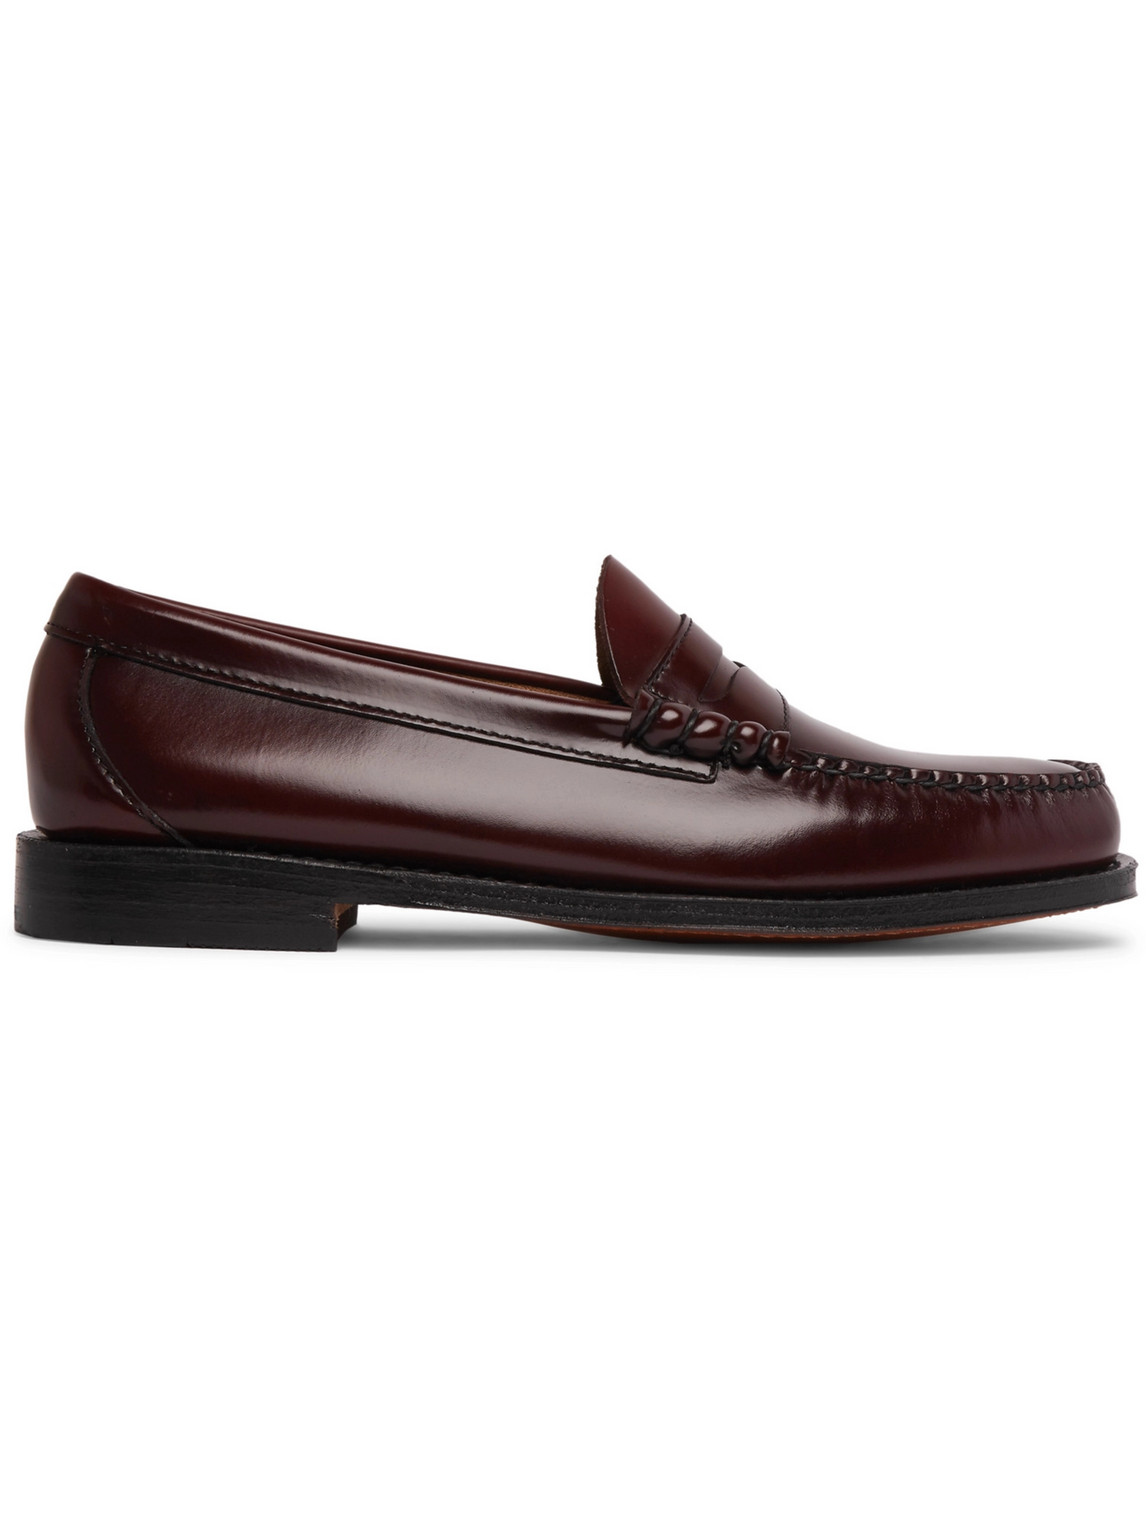 G.H. Bass & Co. - Weejuns Heritage Larson Leather Penny Loafers - Men - Burgundy - UK 12 von G.H. Bass & Co.